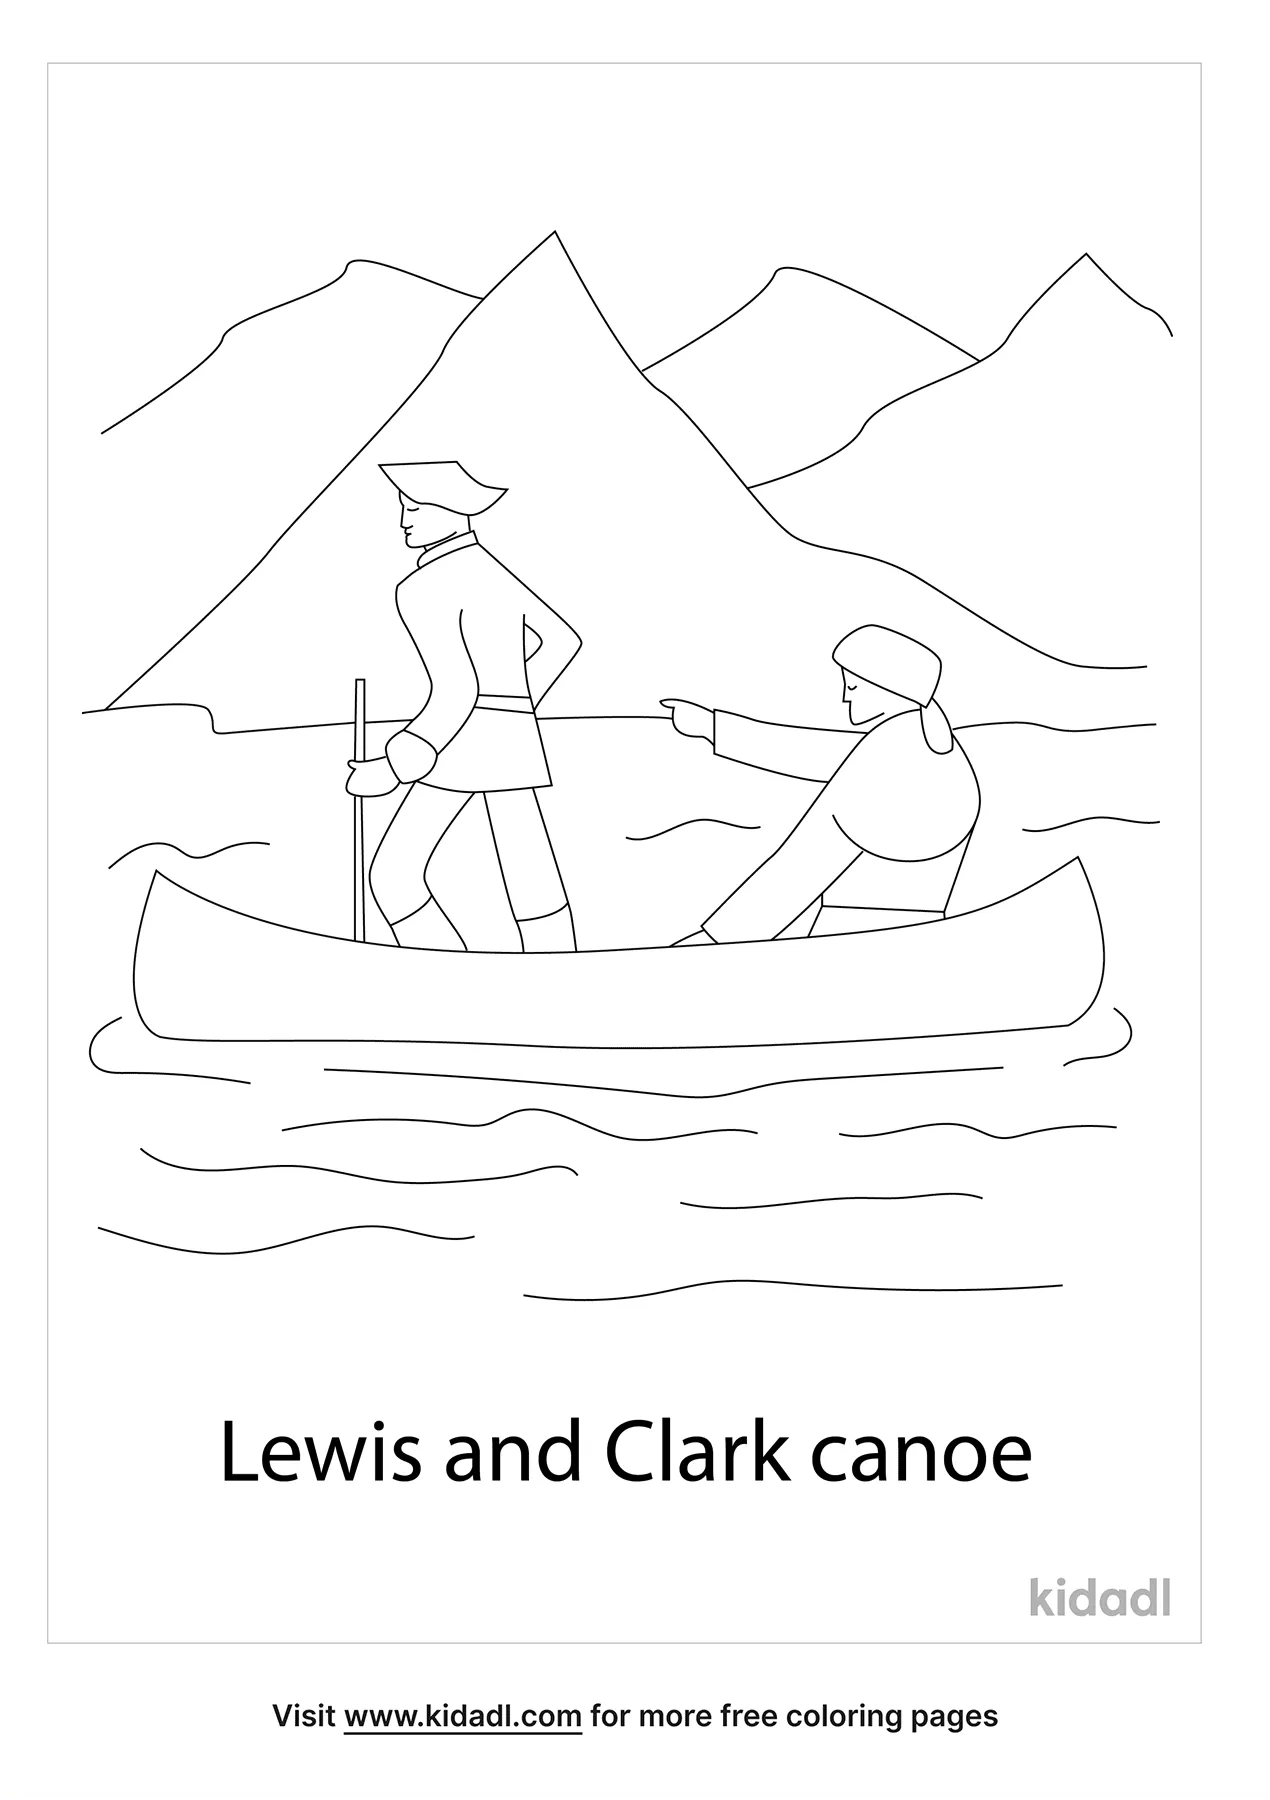 Free lewis and clark canoe coloring page coloring page printables